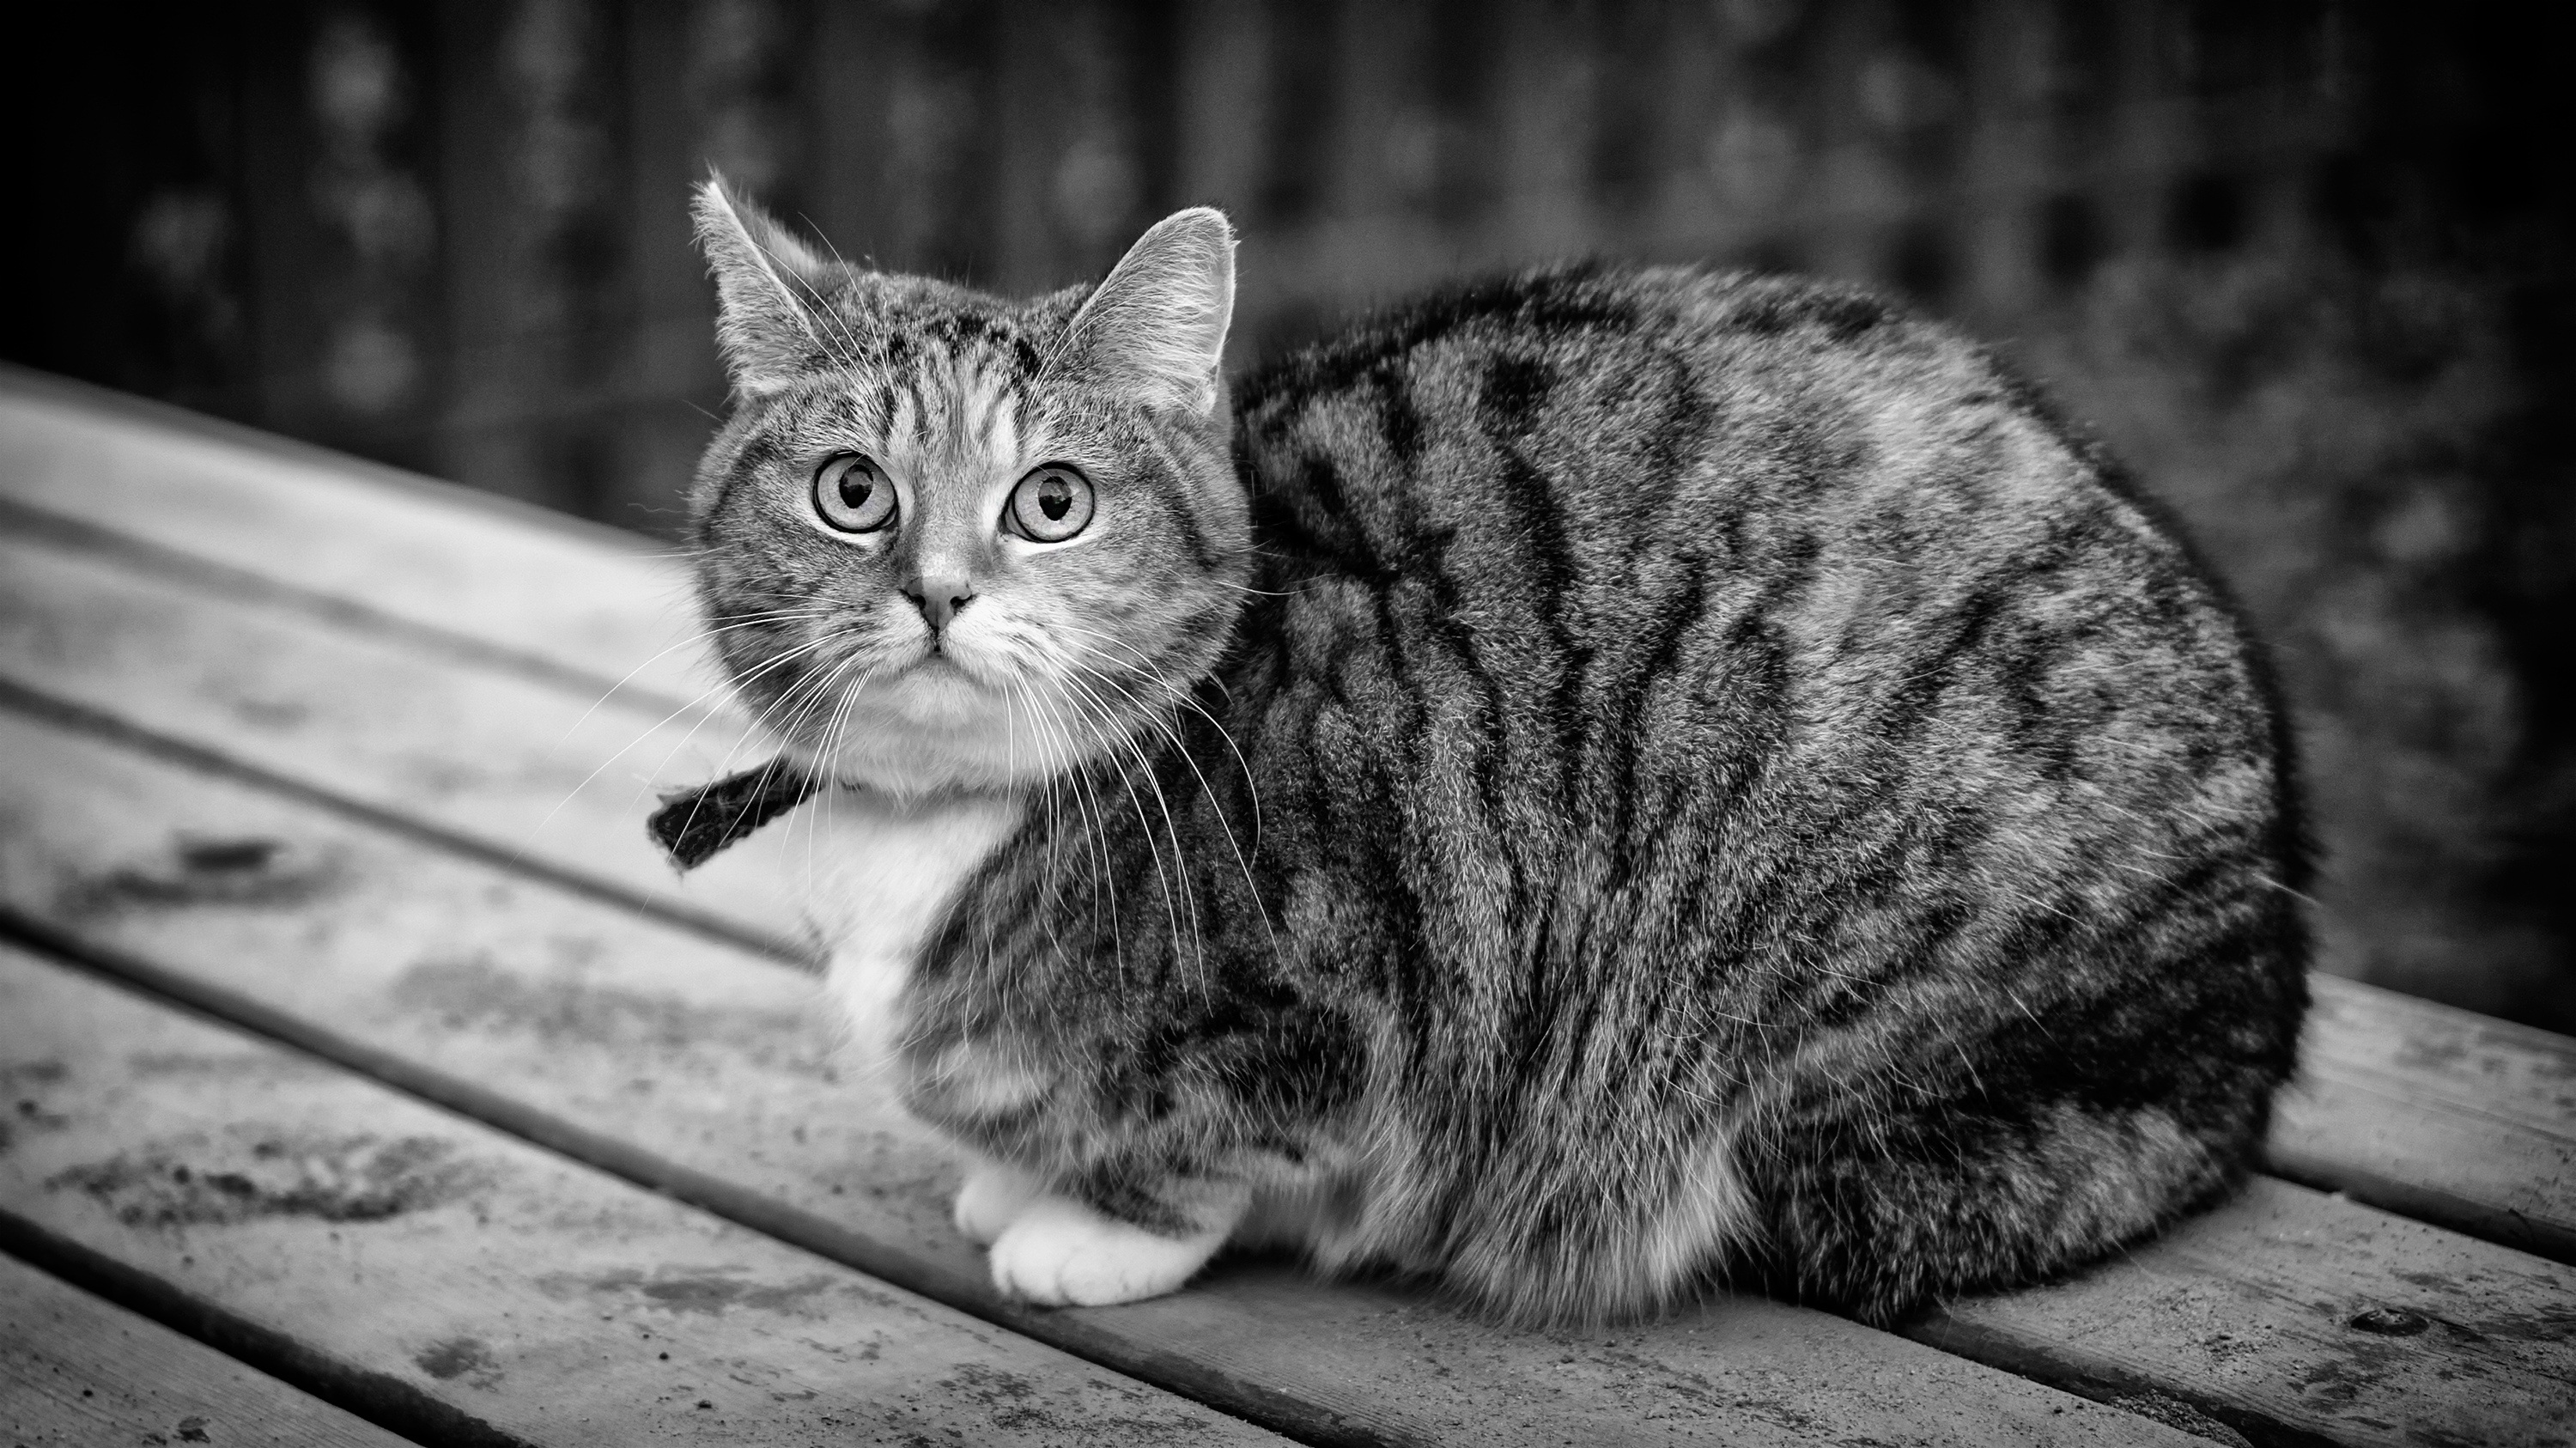 animals, sit, cat, striped, bw, chb High Definition image